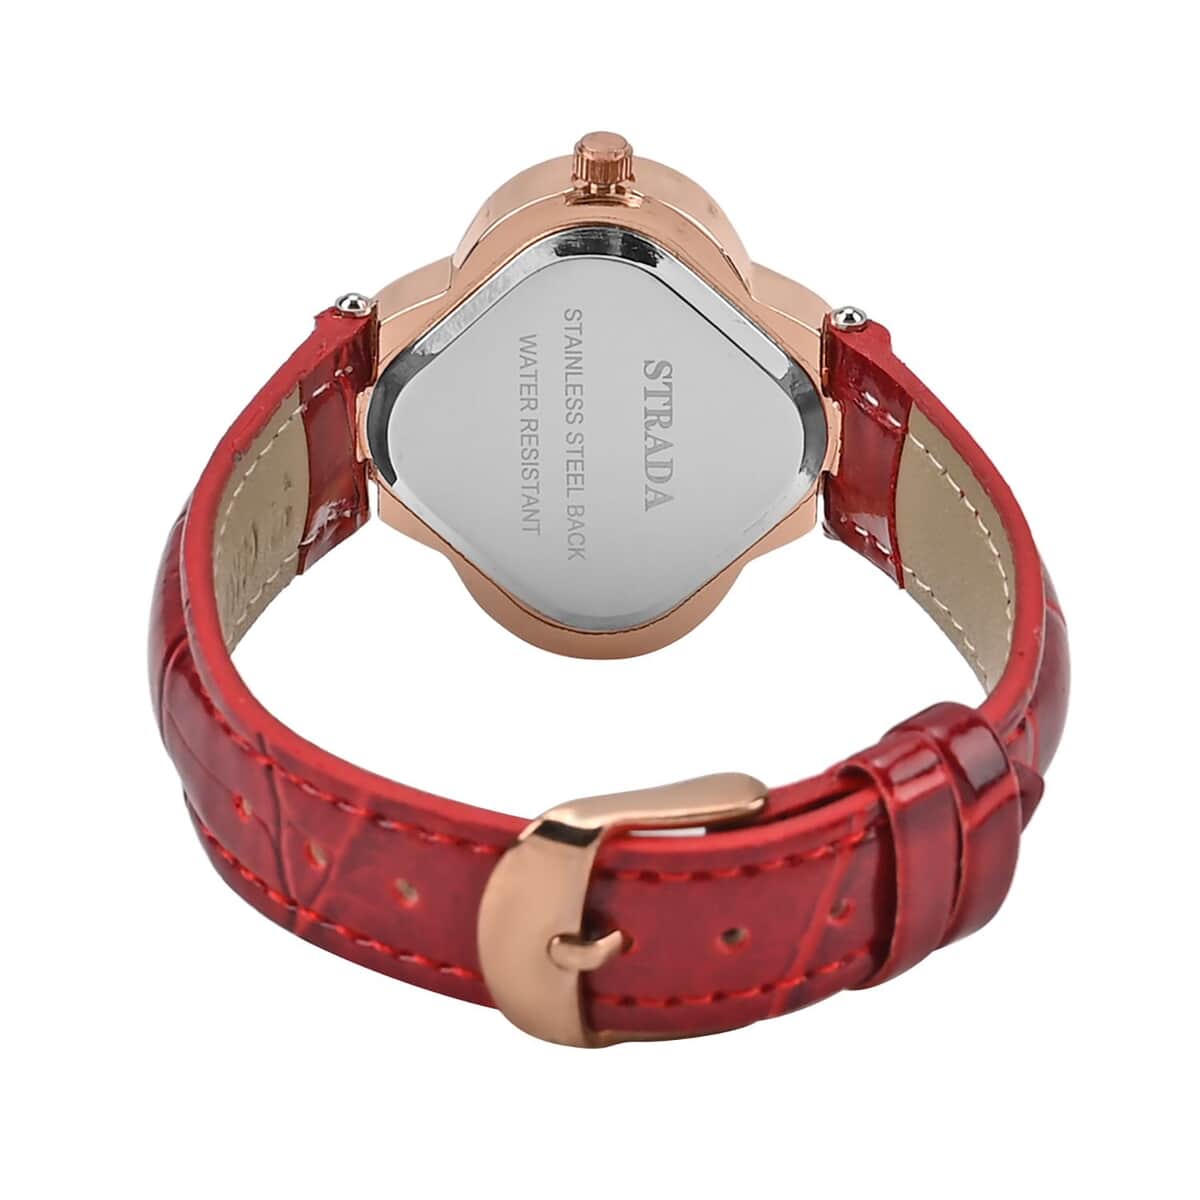 Strada Austrian Crystal Japanese Movement Four Clover Leaf Pattern Watch in Rosetone with Red Faux Leather Strap (36.57mm) (6.5-8.5 Inches) image number 6